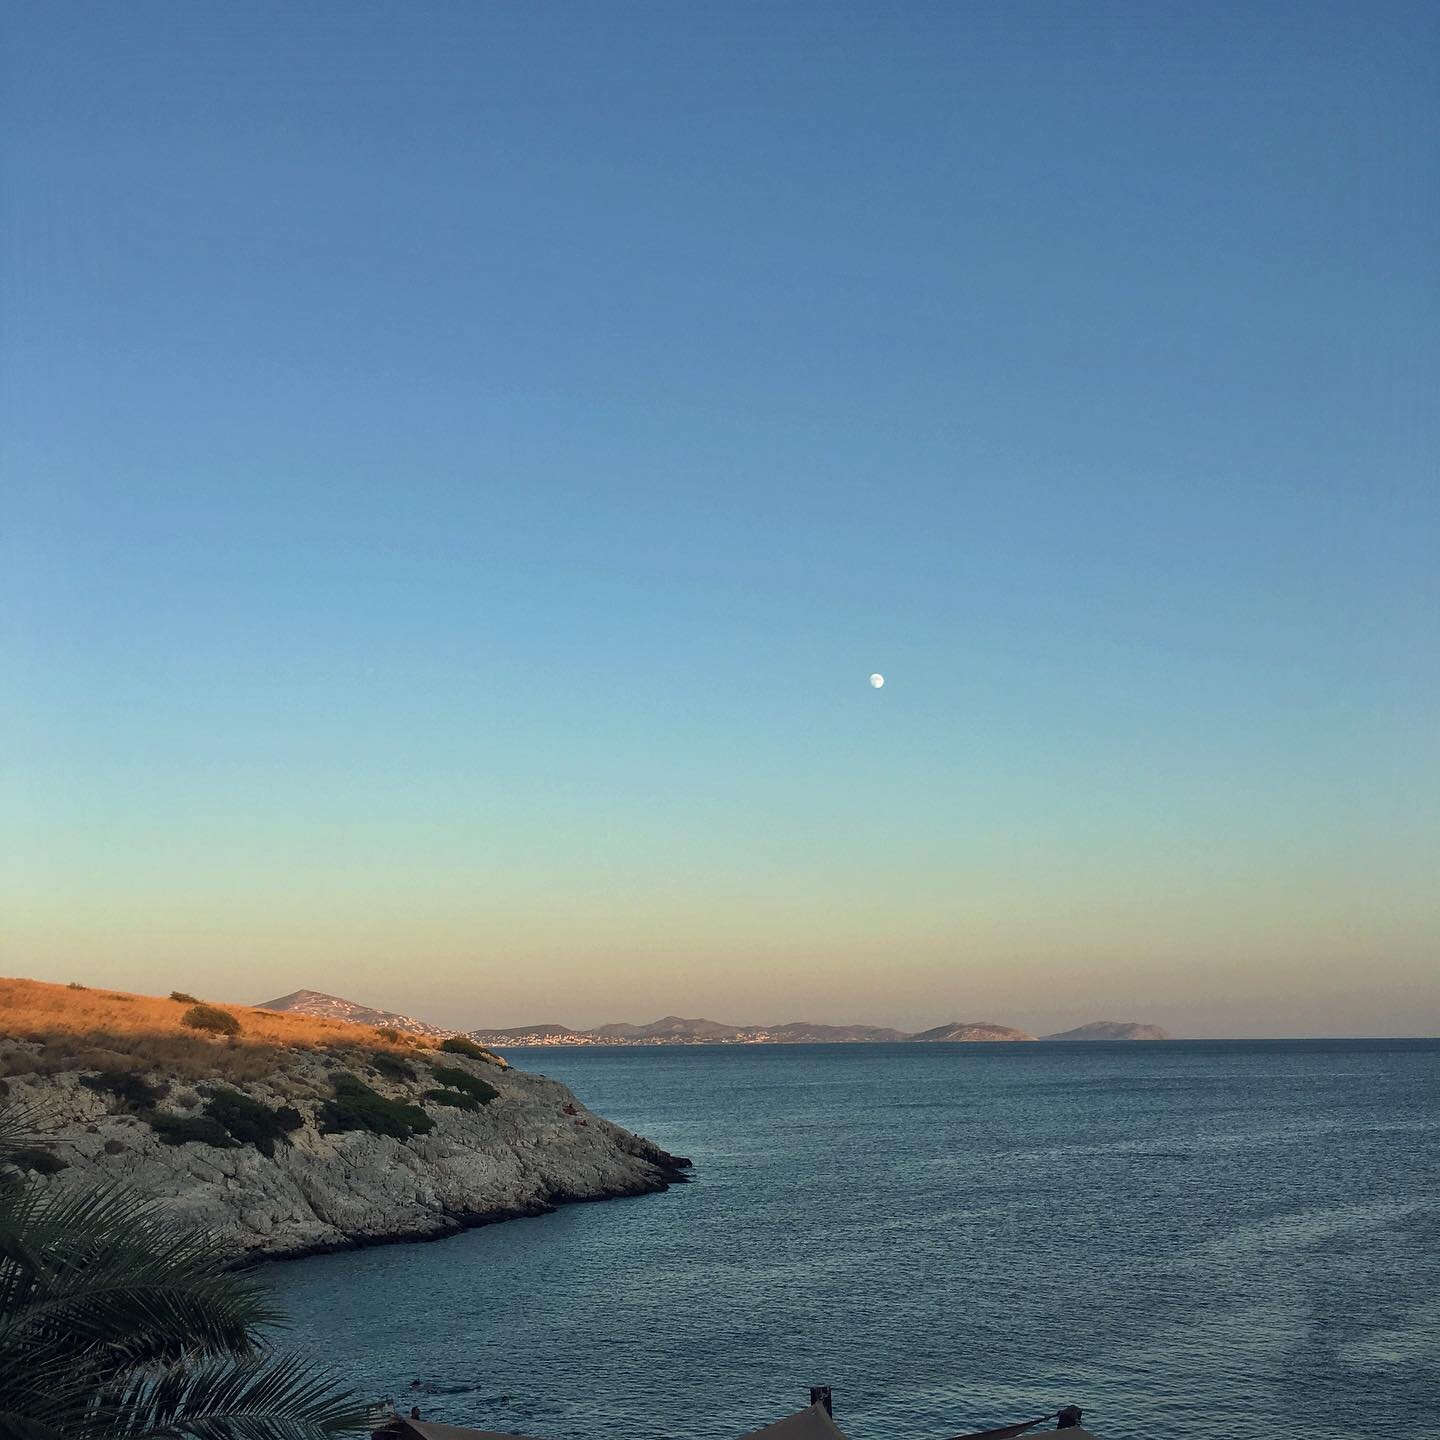 Uranus is in retrograde in Taurus so that&rsquo;s why I&rsquo;m a bitch today. Happy New Moon y&rsquo;all 🌝 &bull;
&bull;
&bull;
&bull; 
#athens #greece #summer #greek #greeksea #sea #beach #travelblogger #travelholic #expatlife #expat #abroad #life